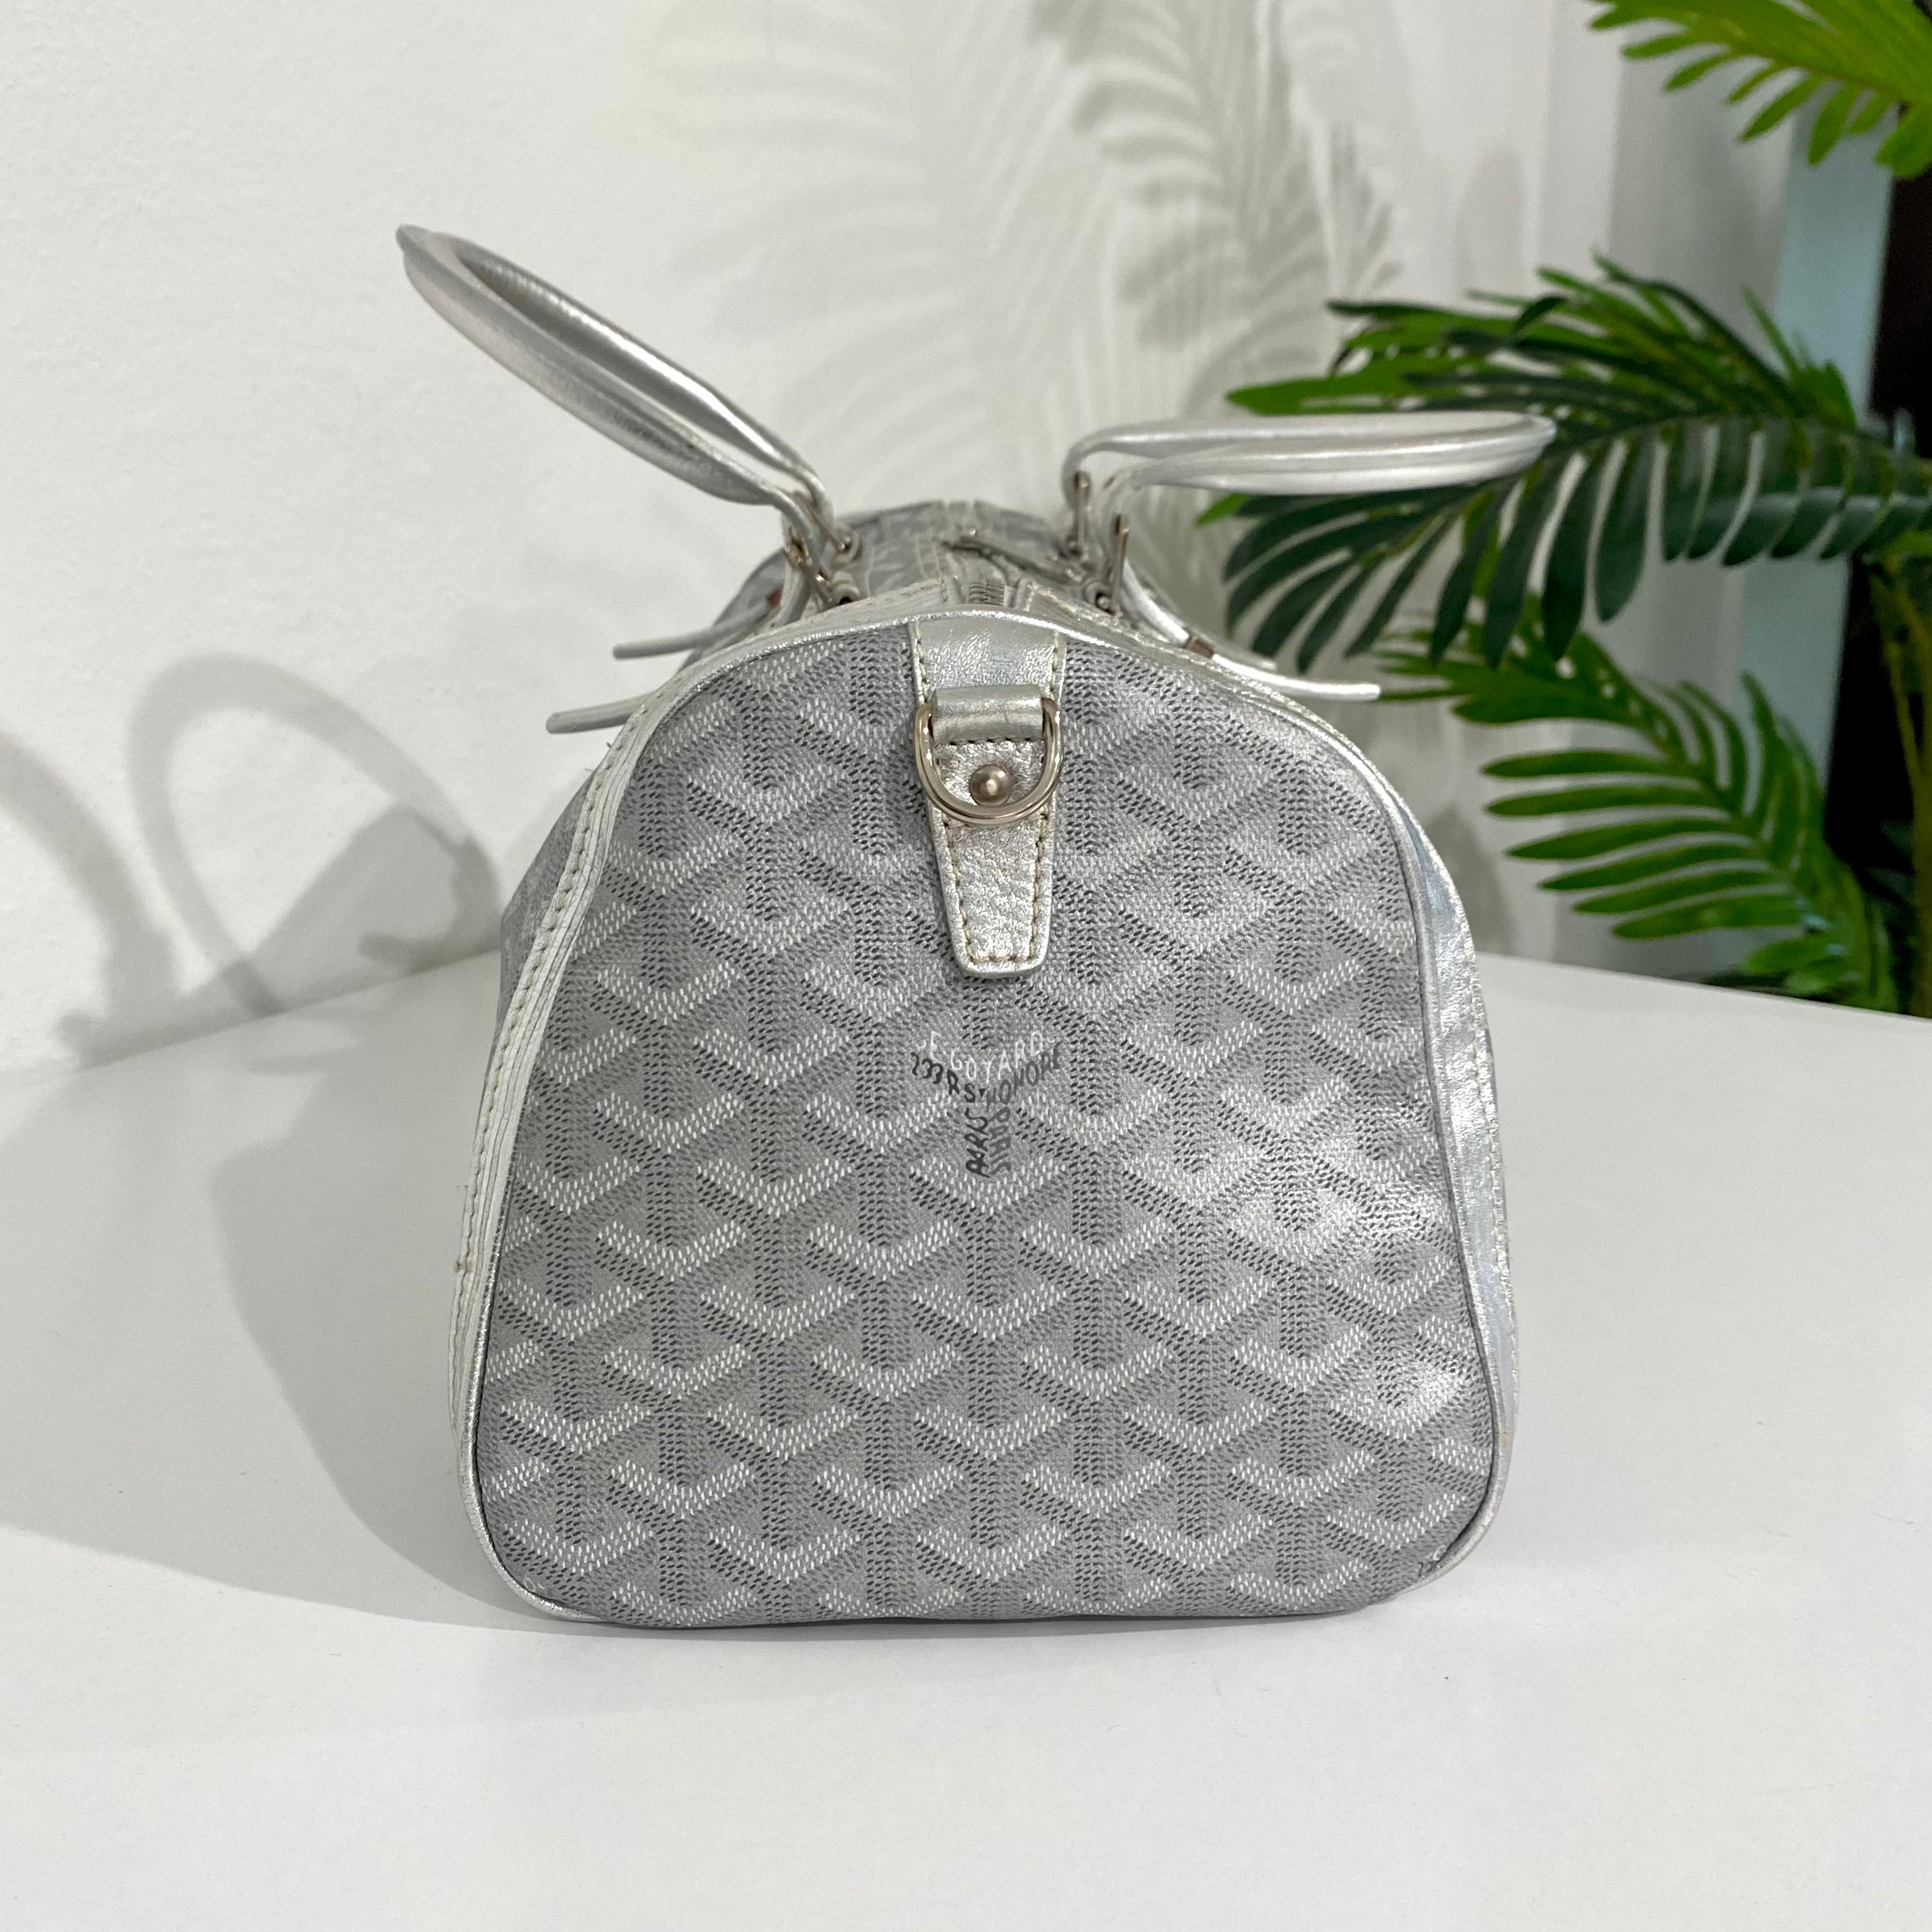 Sold at Auction: Goyard Croisere Metallic Silver Leather Duffle Bag